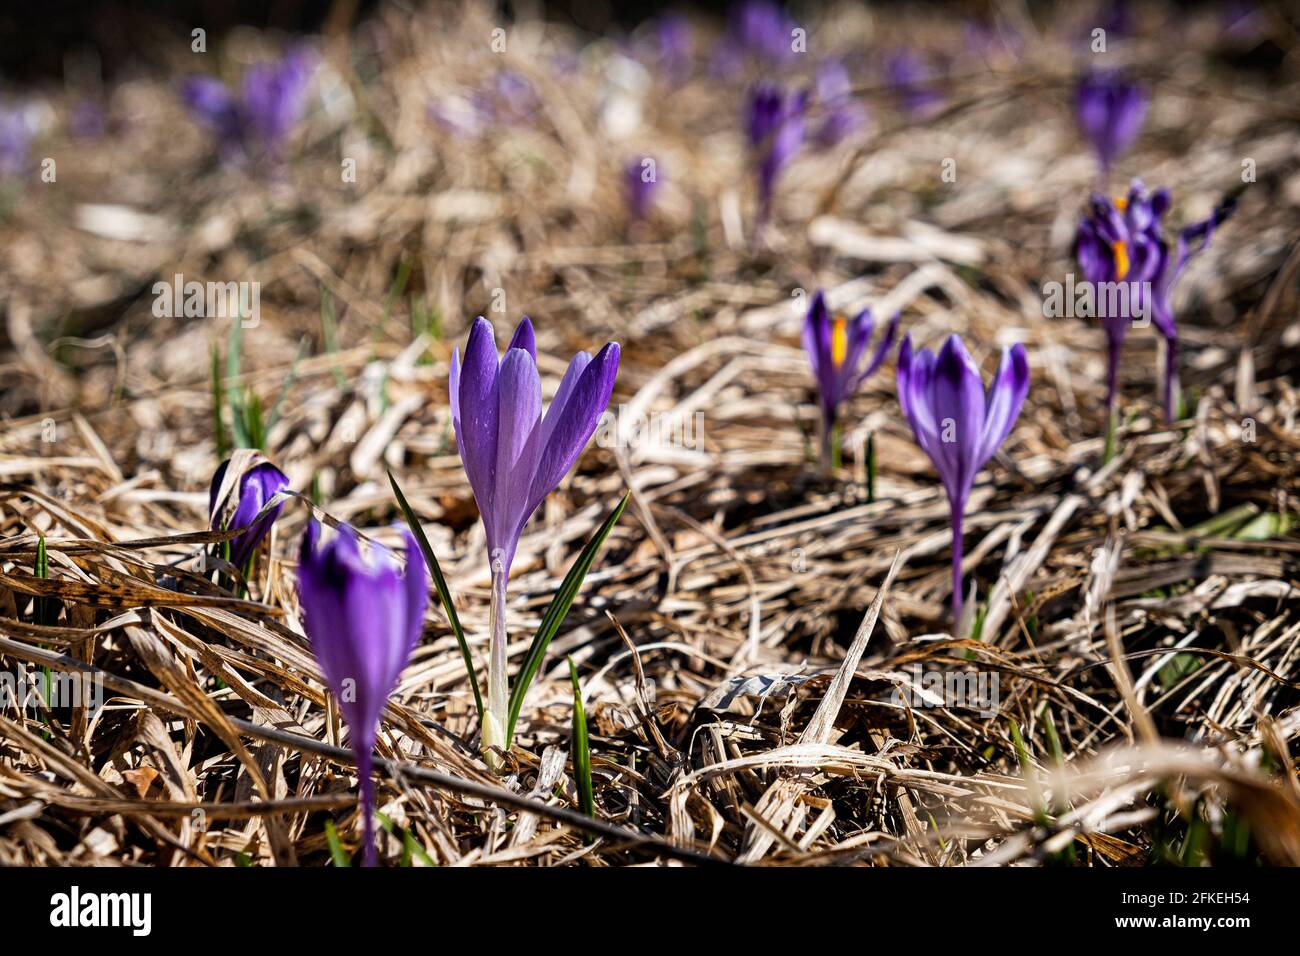 Blooming crocus flowers in Big Fatra mountains, Slovak republic. Springtime natural scene. Stock Photo